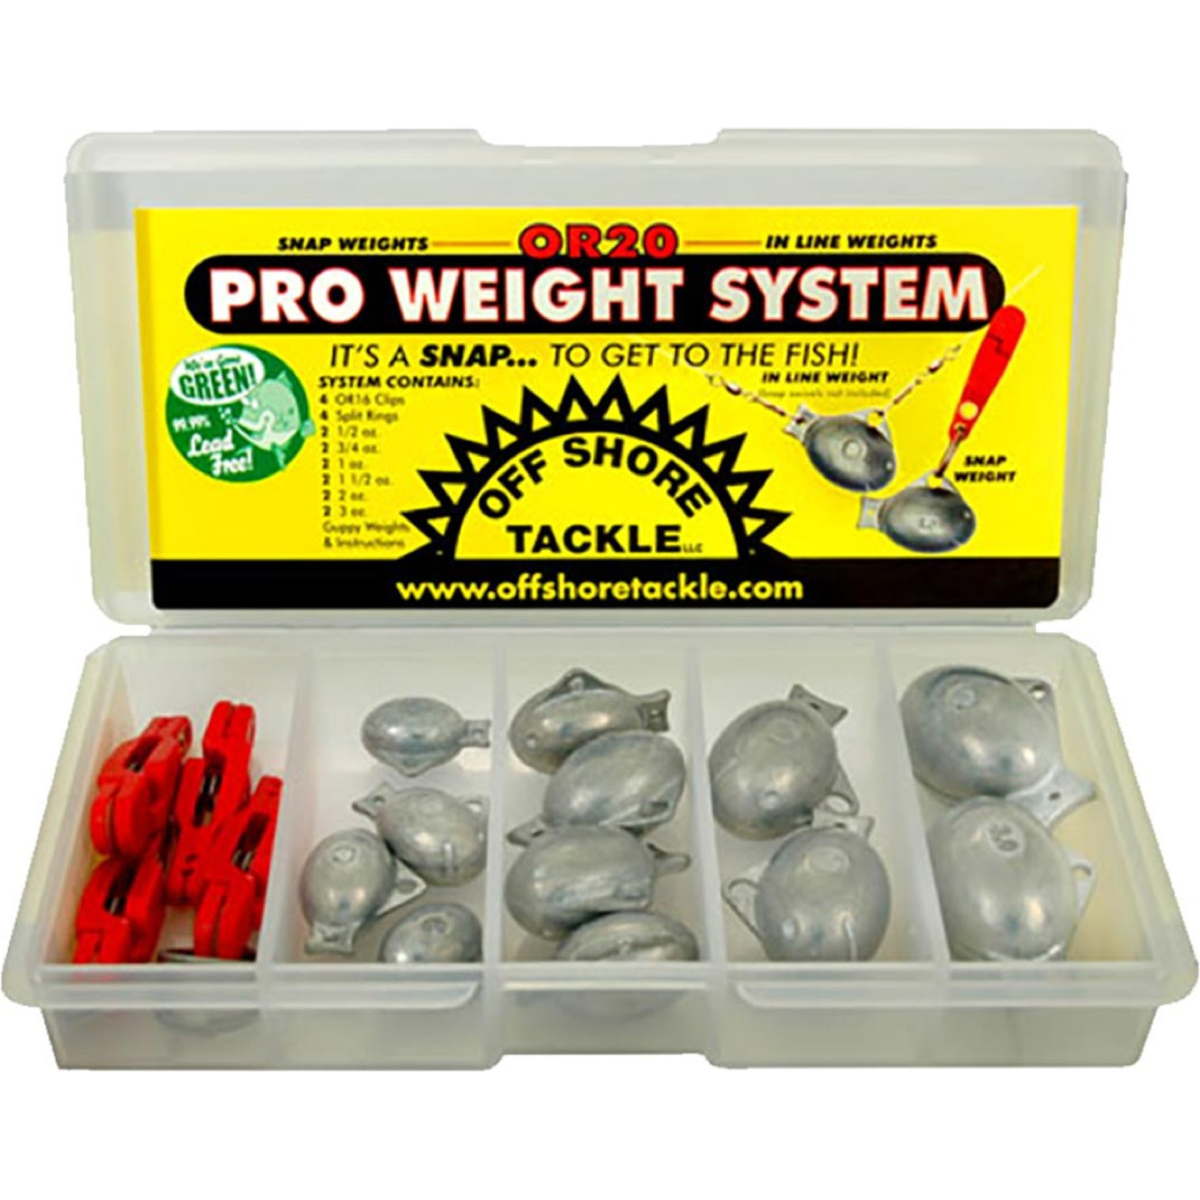 Photo of Off Shore Tackle Pro Weight System for sale at United Tackle Shops.